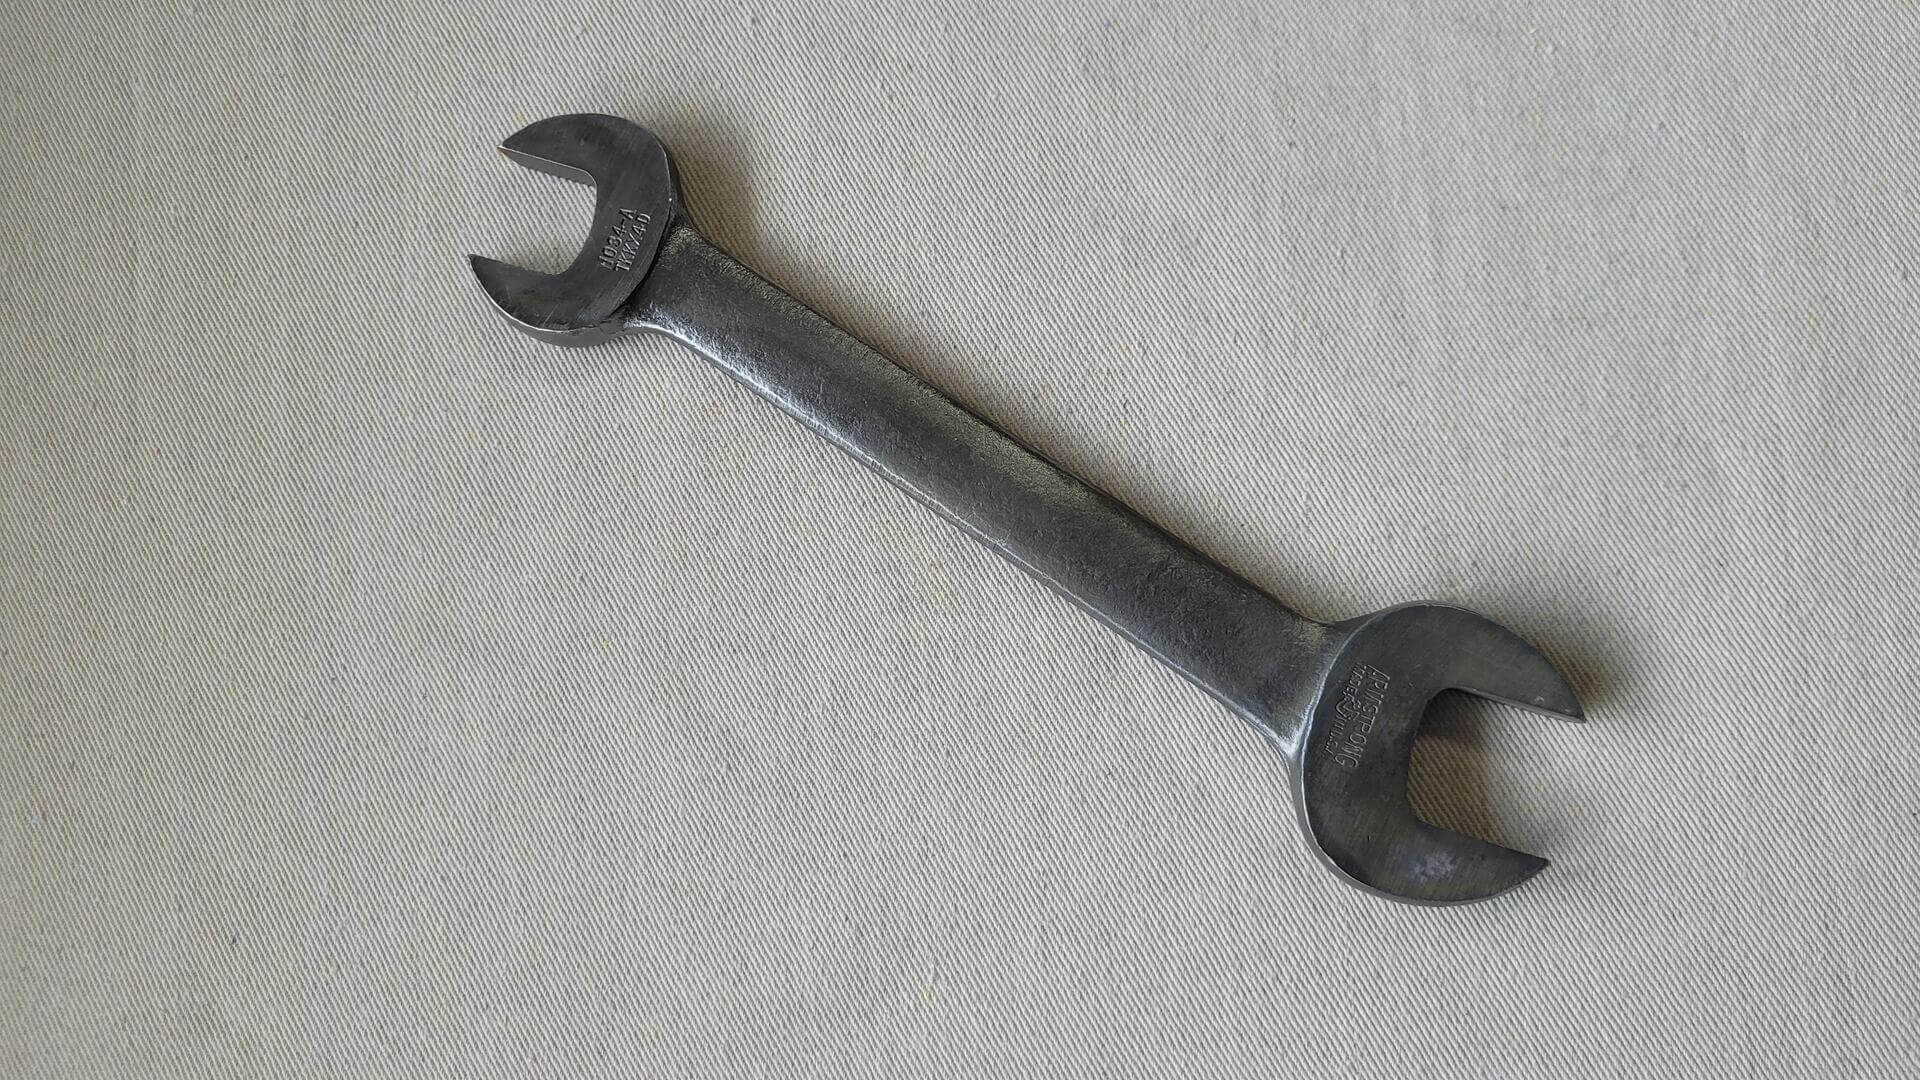 Nice vintage Armstrong Tools 15/16" x 1-1/16" open end wrench spanner model 1034-A. Antique made in USA collectible automotive mechanics hand tools